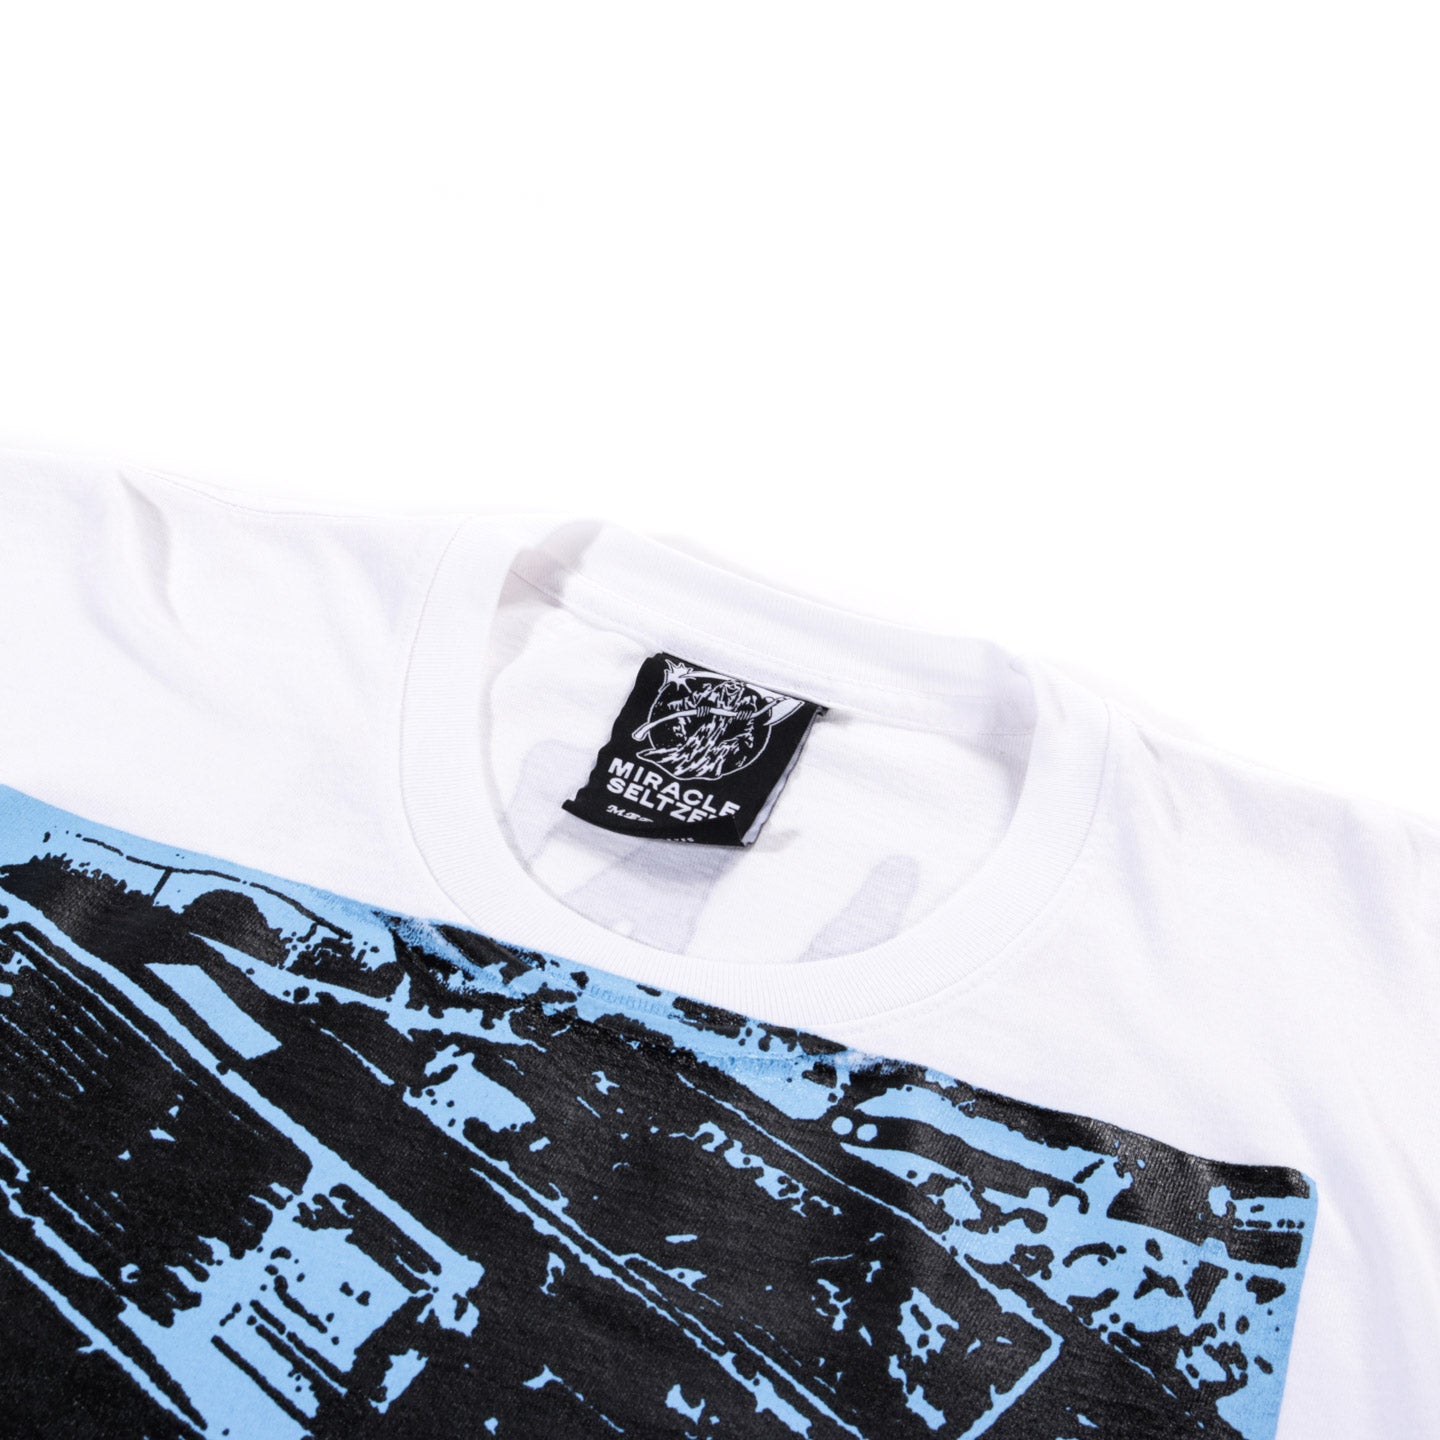 MIRACLE SELTZER TOAD PLANET LS TEE WHITE